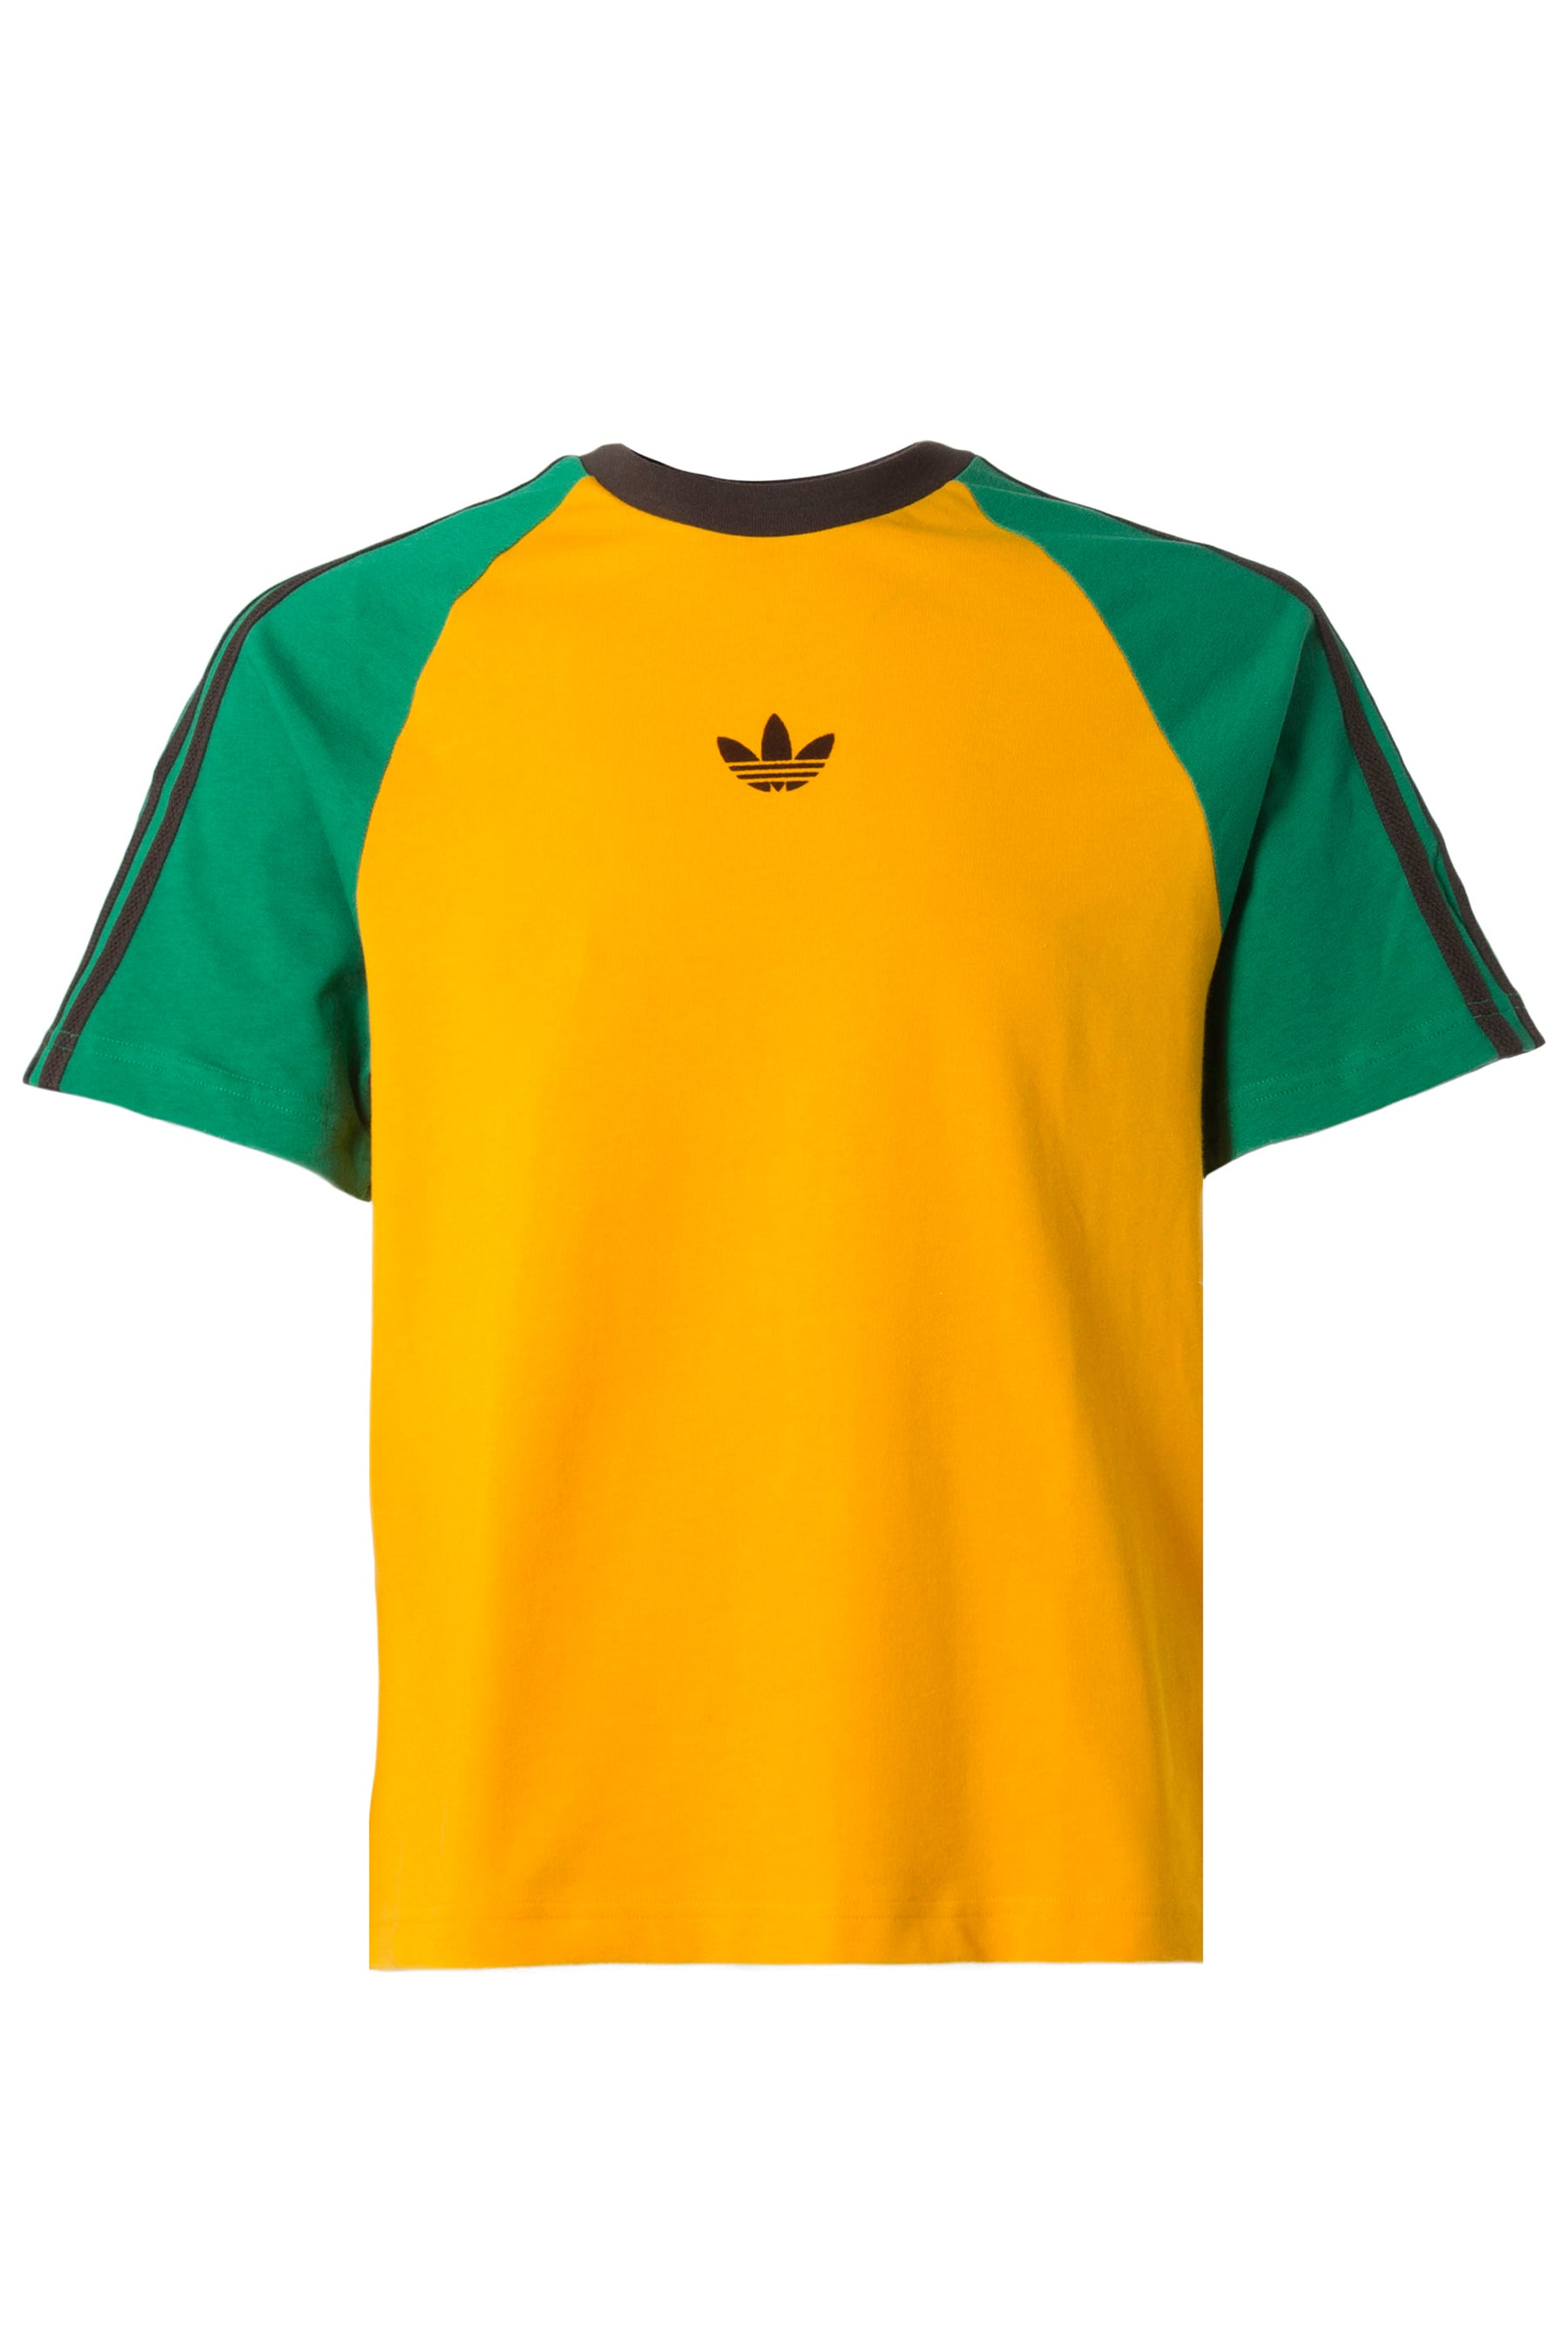 adidas×Wales Bonner SS23 WB S/S TEE / COLLEGIATE GOLD -NUBIAN